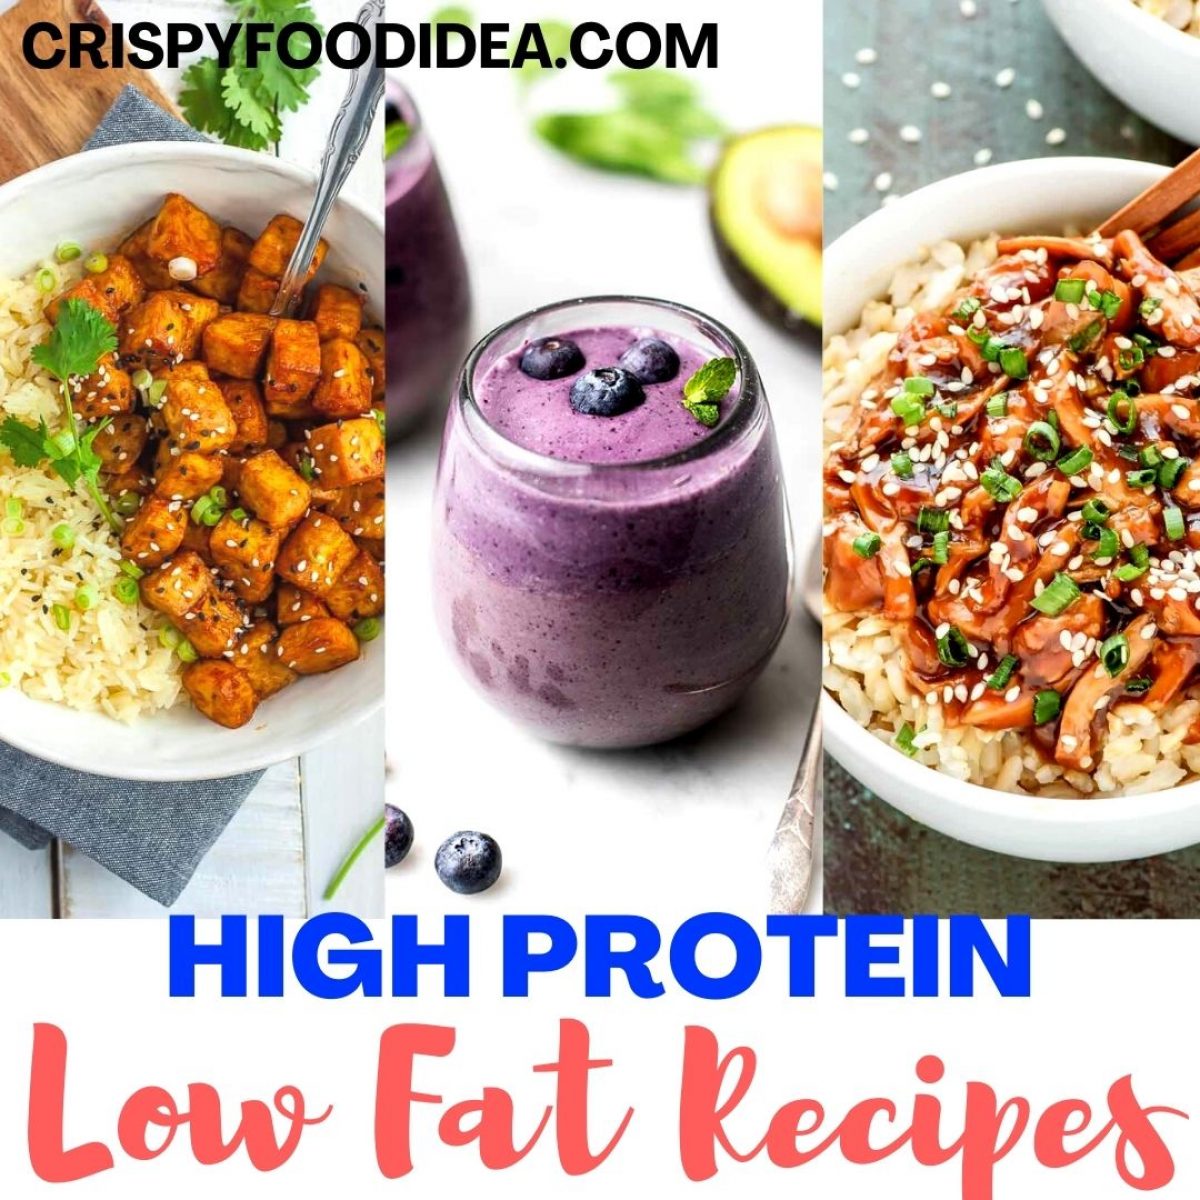 21 High Protein Low Fat Recipes You Need To Try